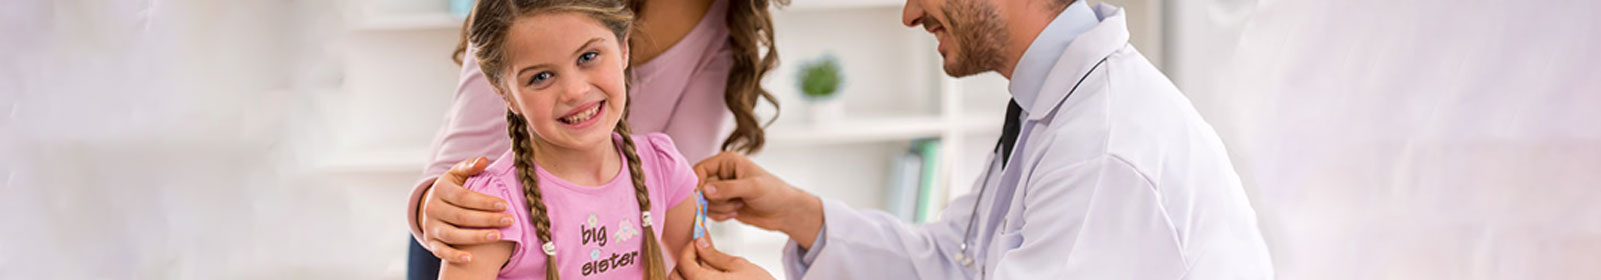 Doctor giving a child an vaccine shot